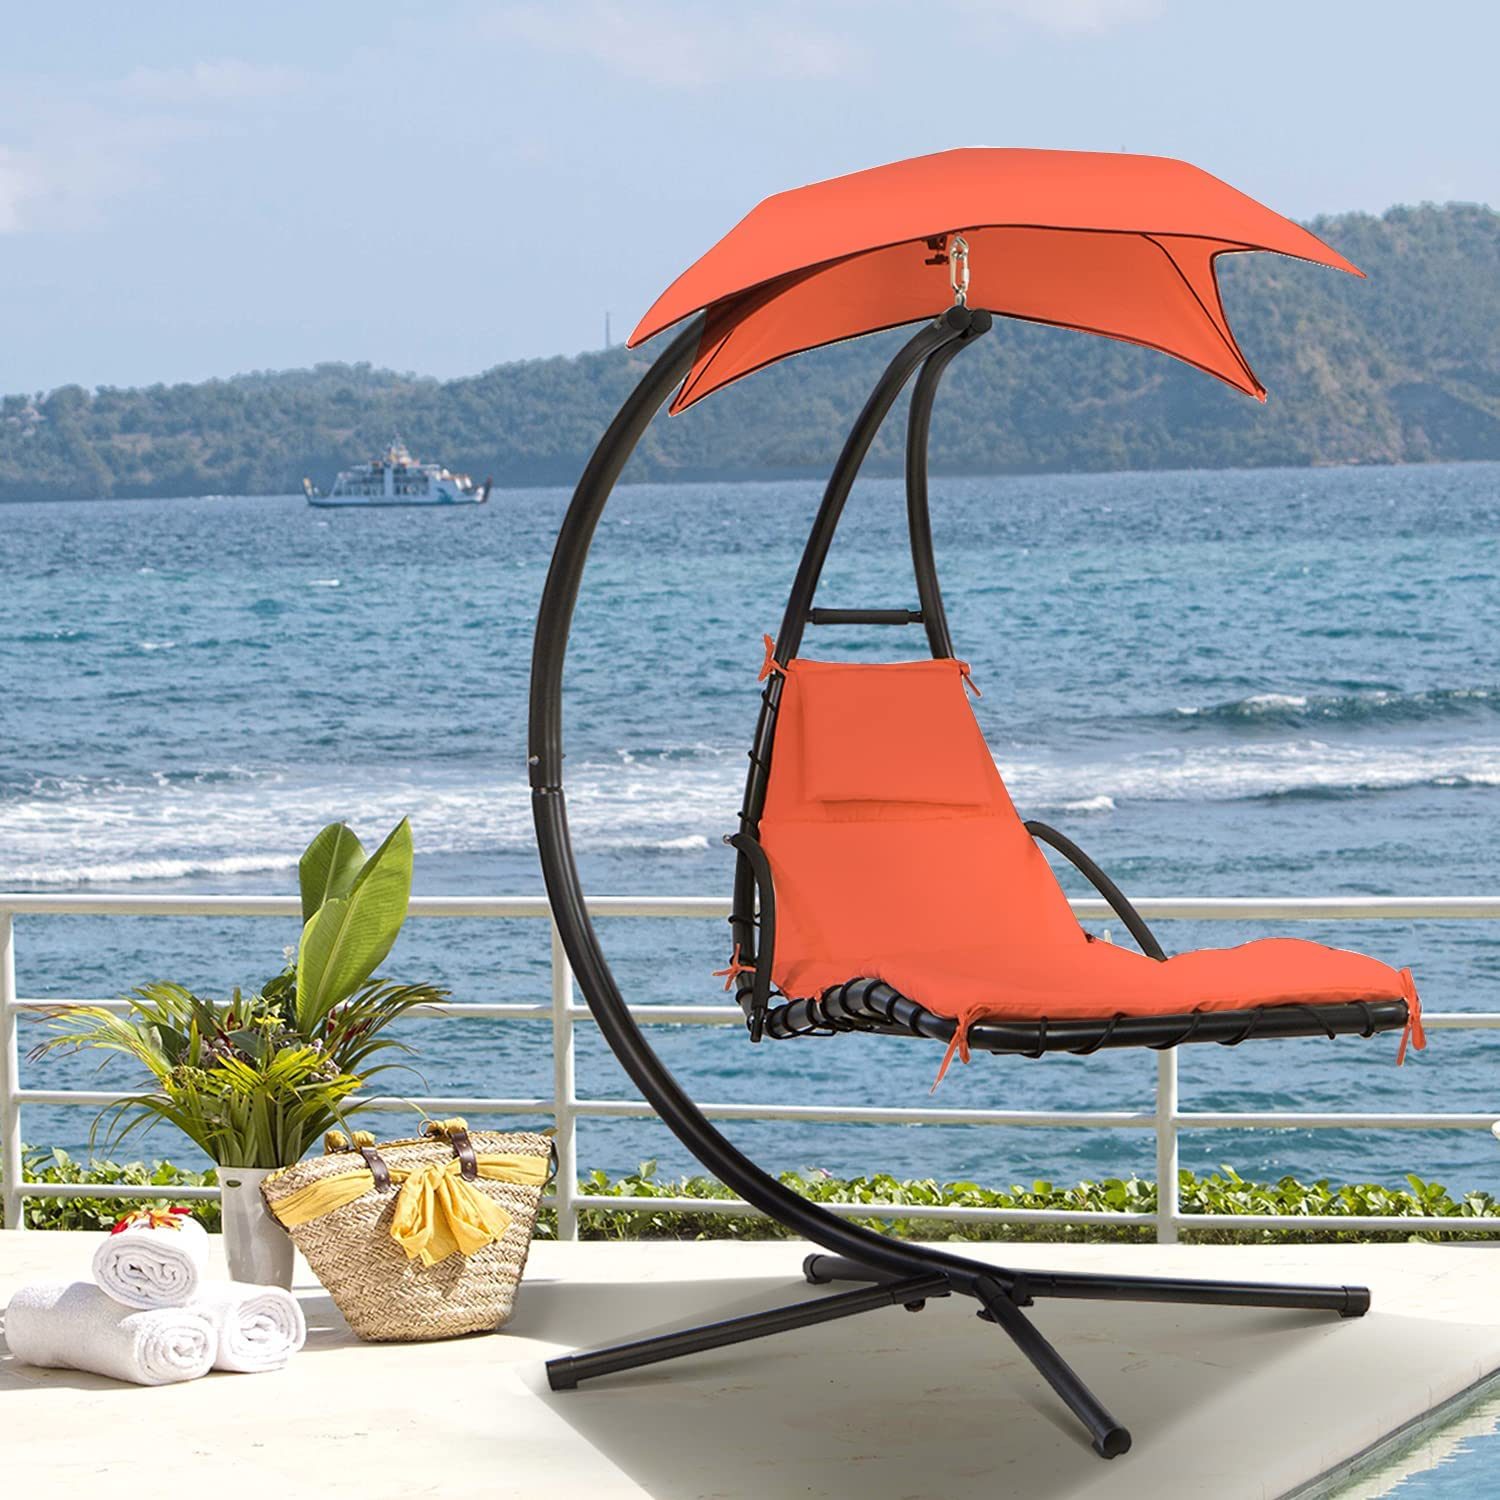 YRLLENSDAN Hanging Curved Chaise Lounge Chair Swing, Outdoor Lounge Swing with Canopy Floating Hammock Swing Patio w/ Built-in Pillow for Beach Backyard, Orange - image 1 of 7